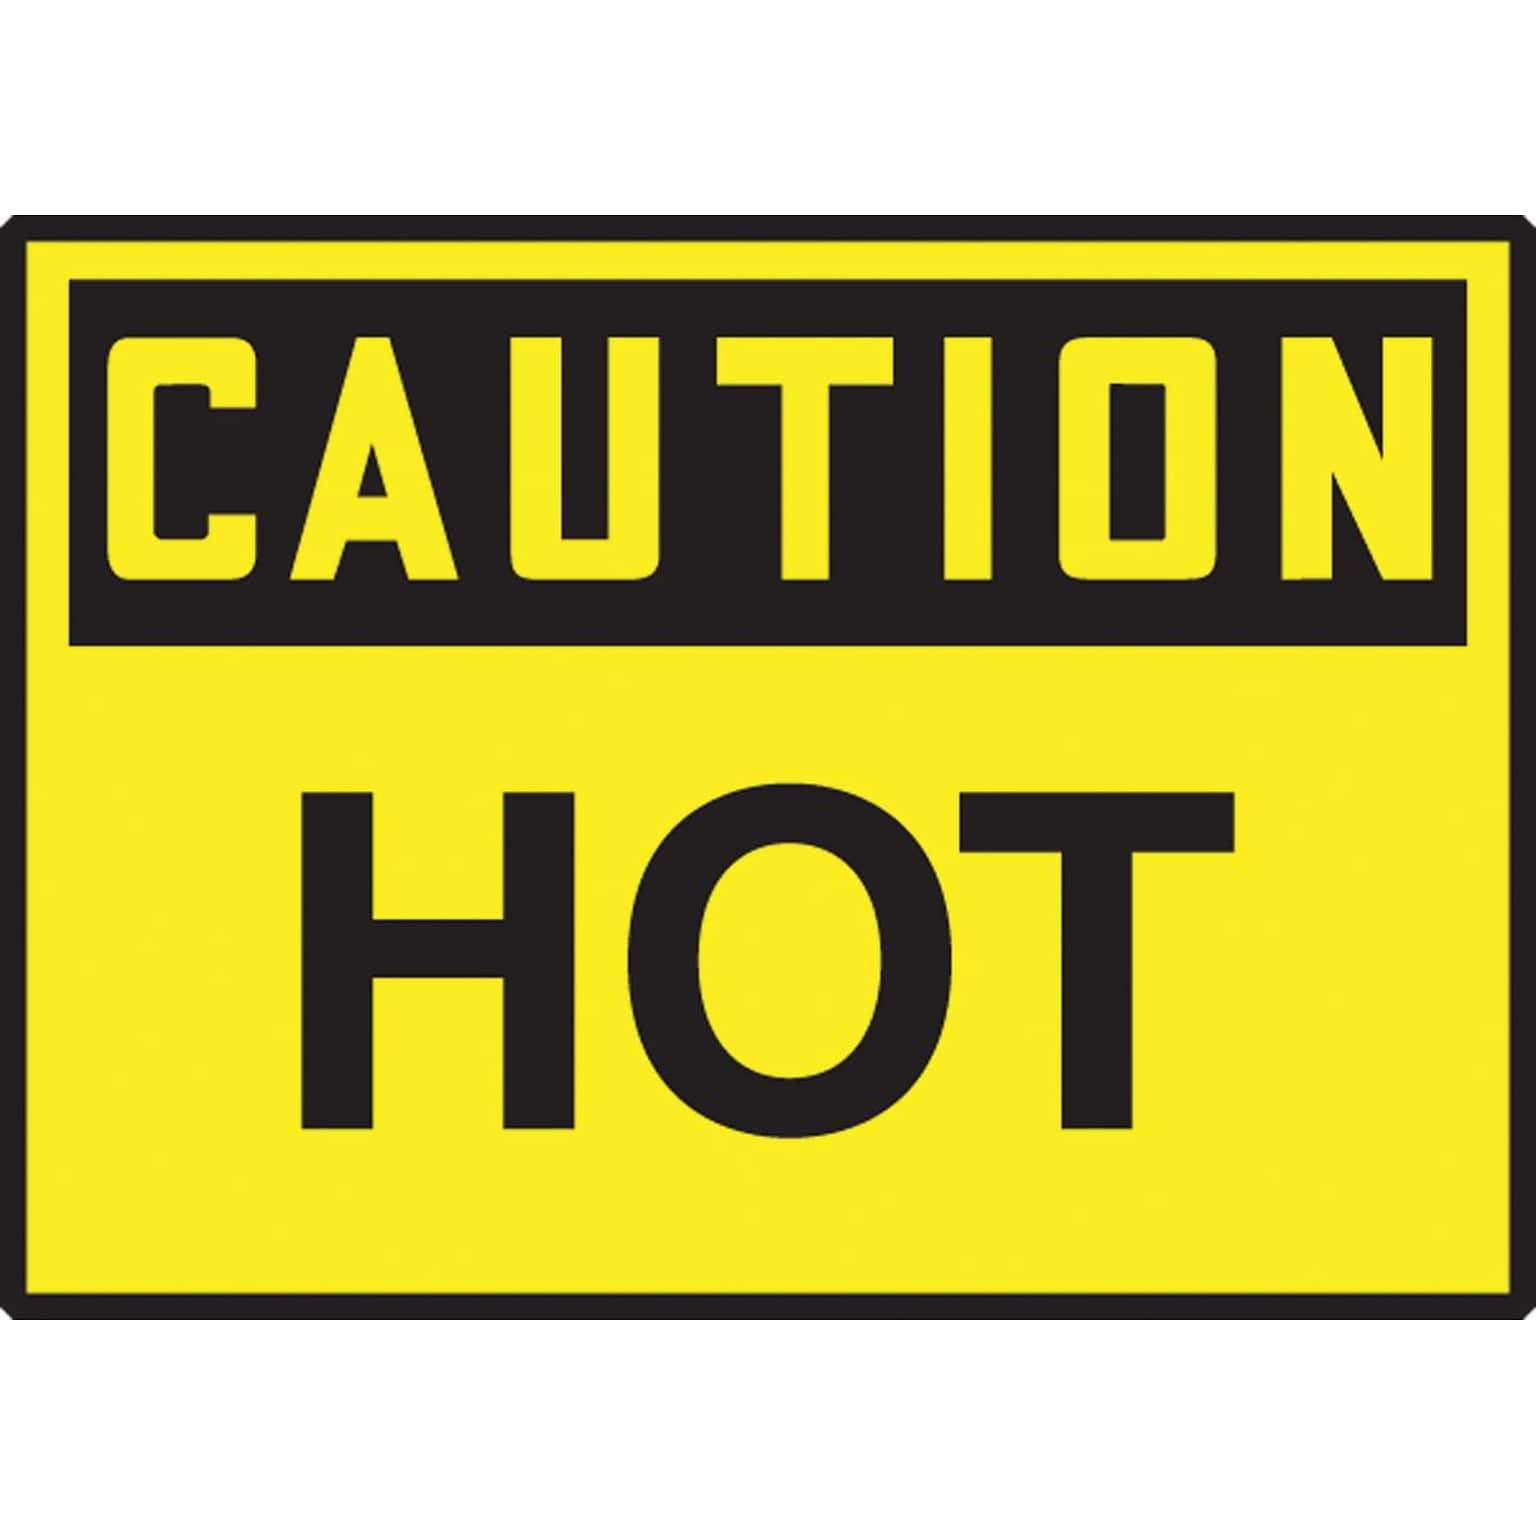 Accuform 3 1/2 x 5 Adhesive Vinyl Safety Label CAUTION HOT, Black On Yellow, 5/Pack (LCHL675VSP)